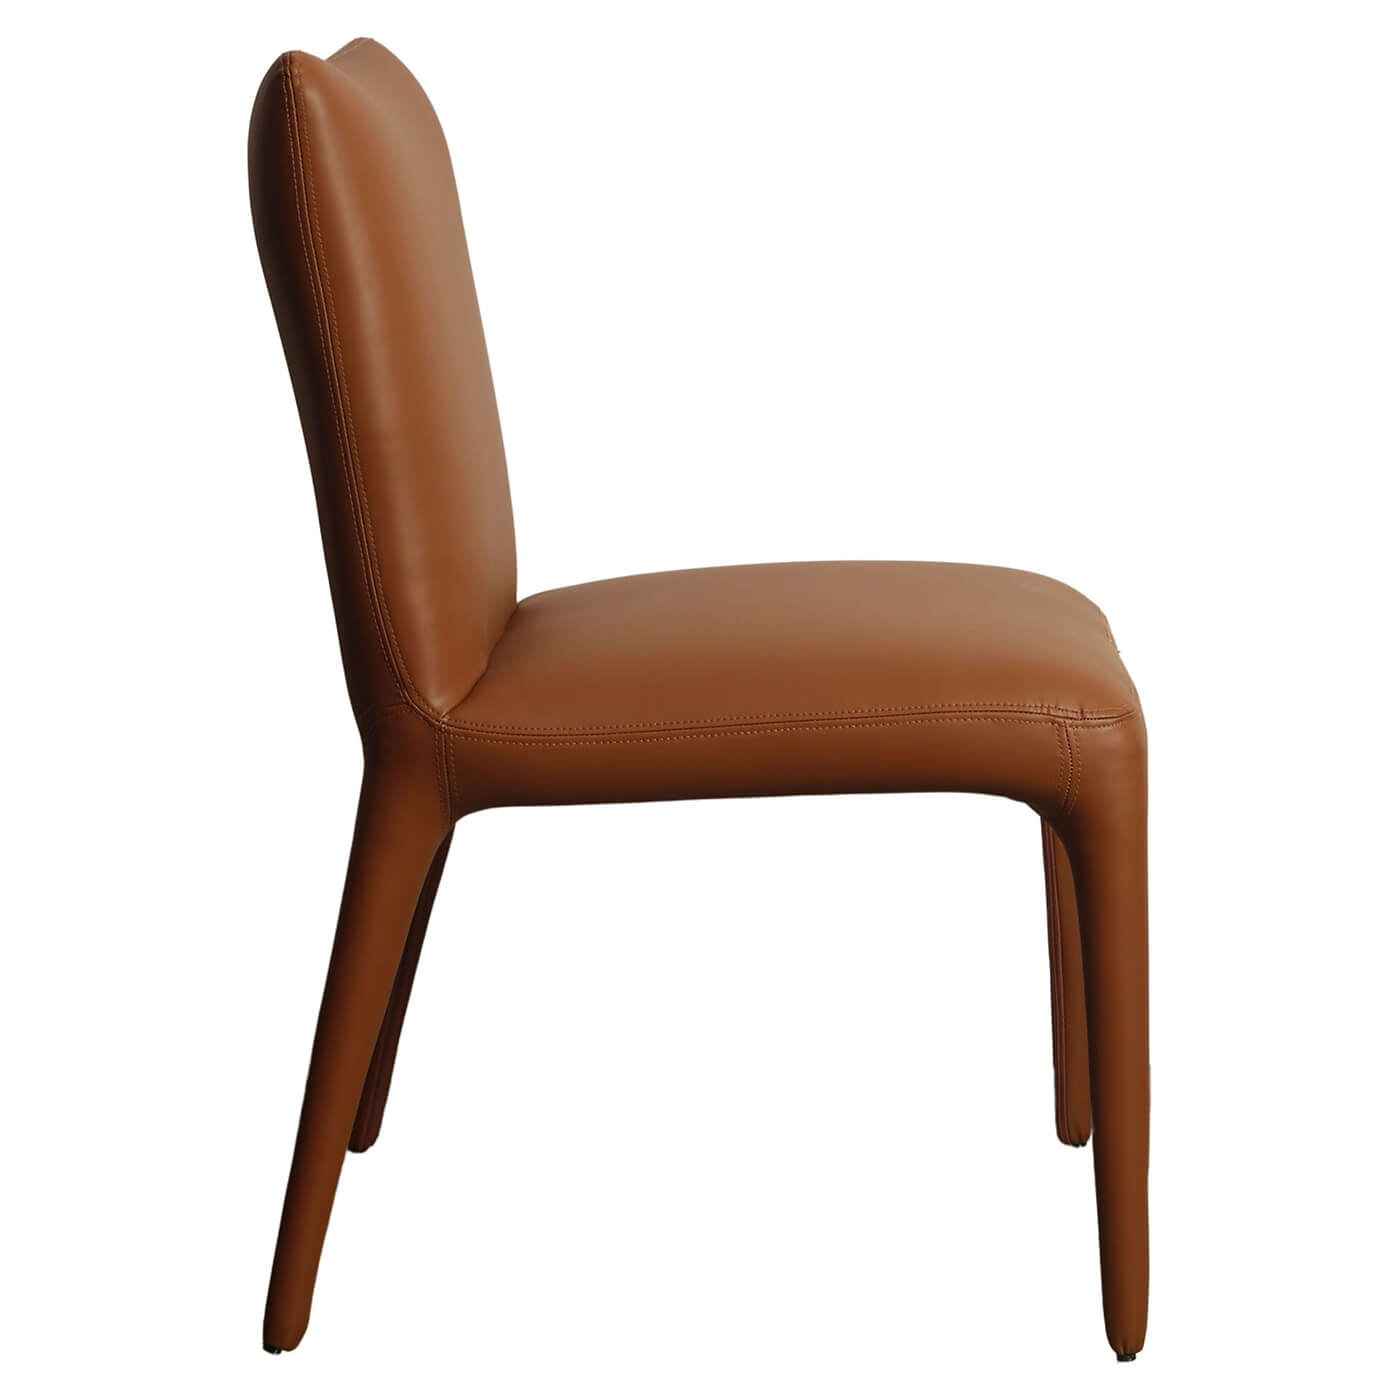 Bravo | Modern Olive PU Leather Dining Chairs | Set Of 2 | Tan